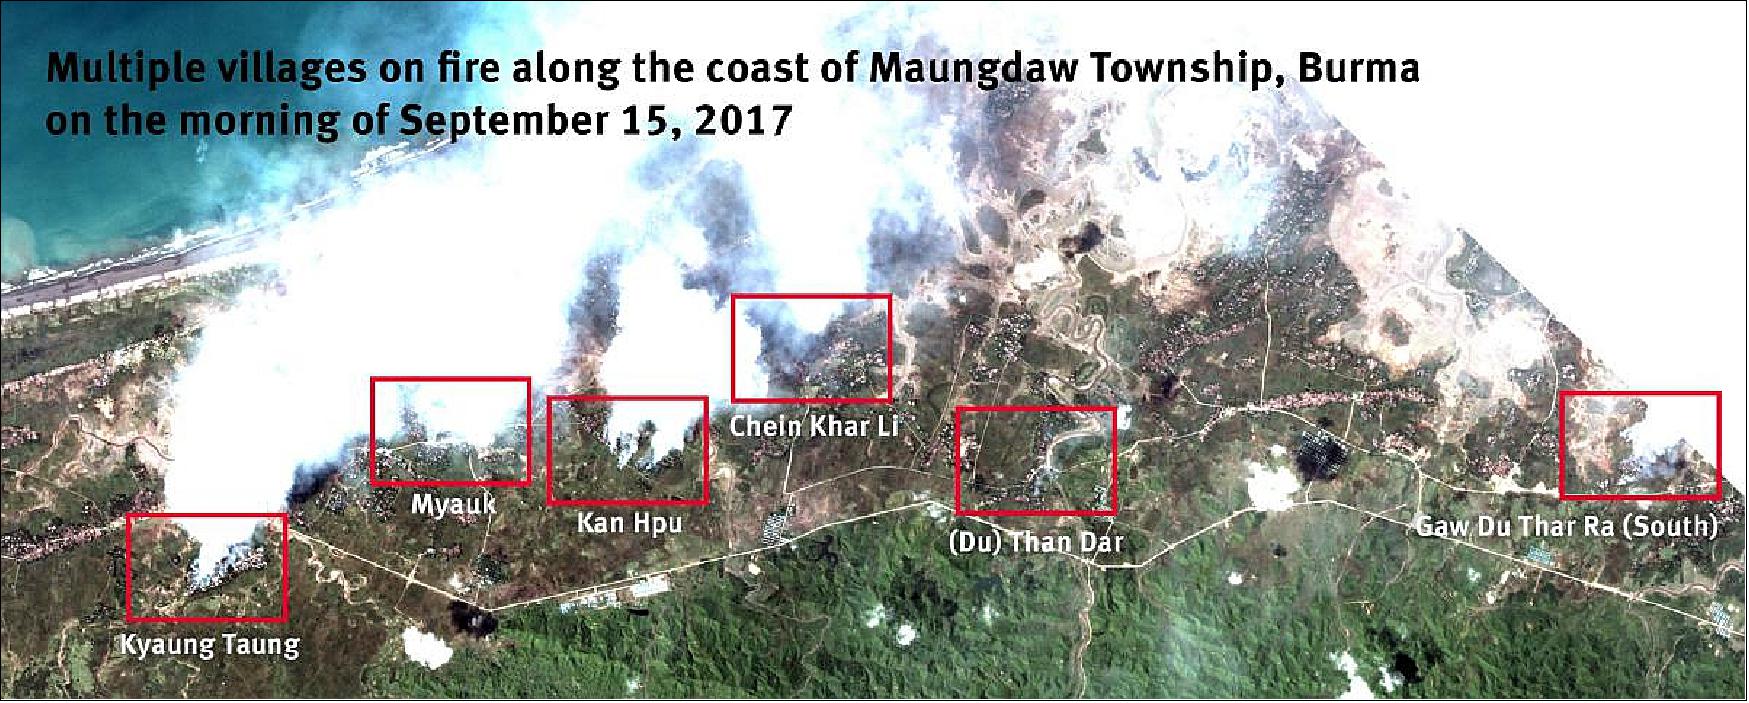 Figure 31: Multiple villages on fire along the coast of Maungdaw Township, Burma on the morning of September 15, 2017. Analysis Human Rights Watch (image credit: Planet Labs)